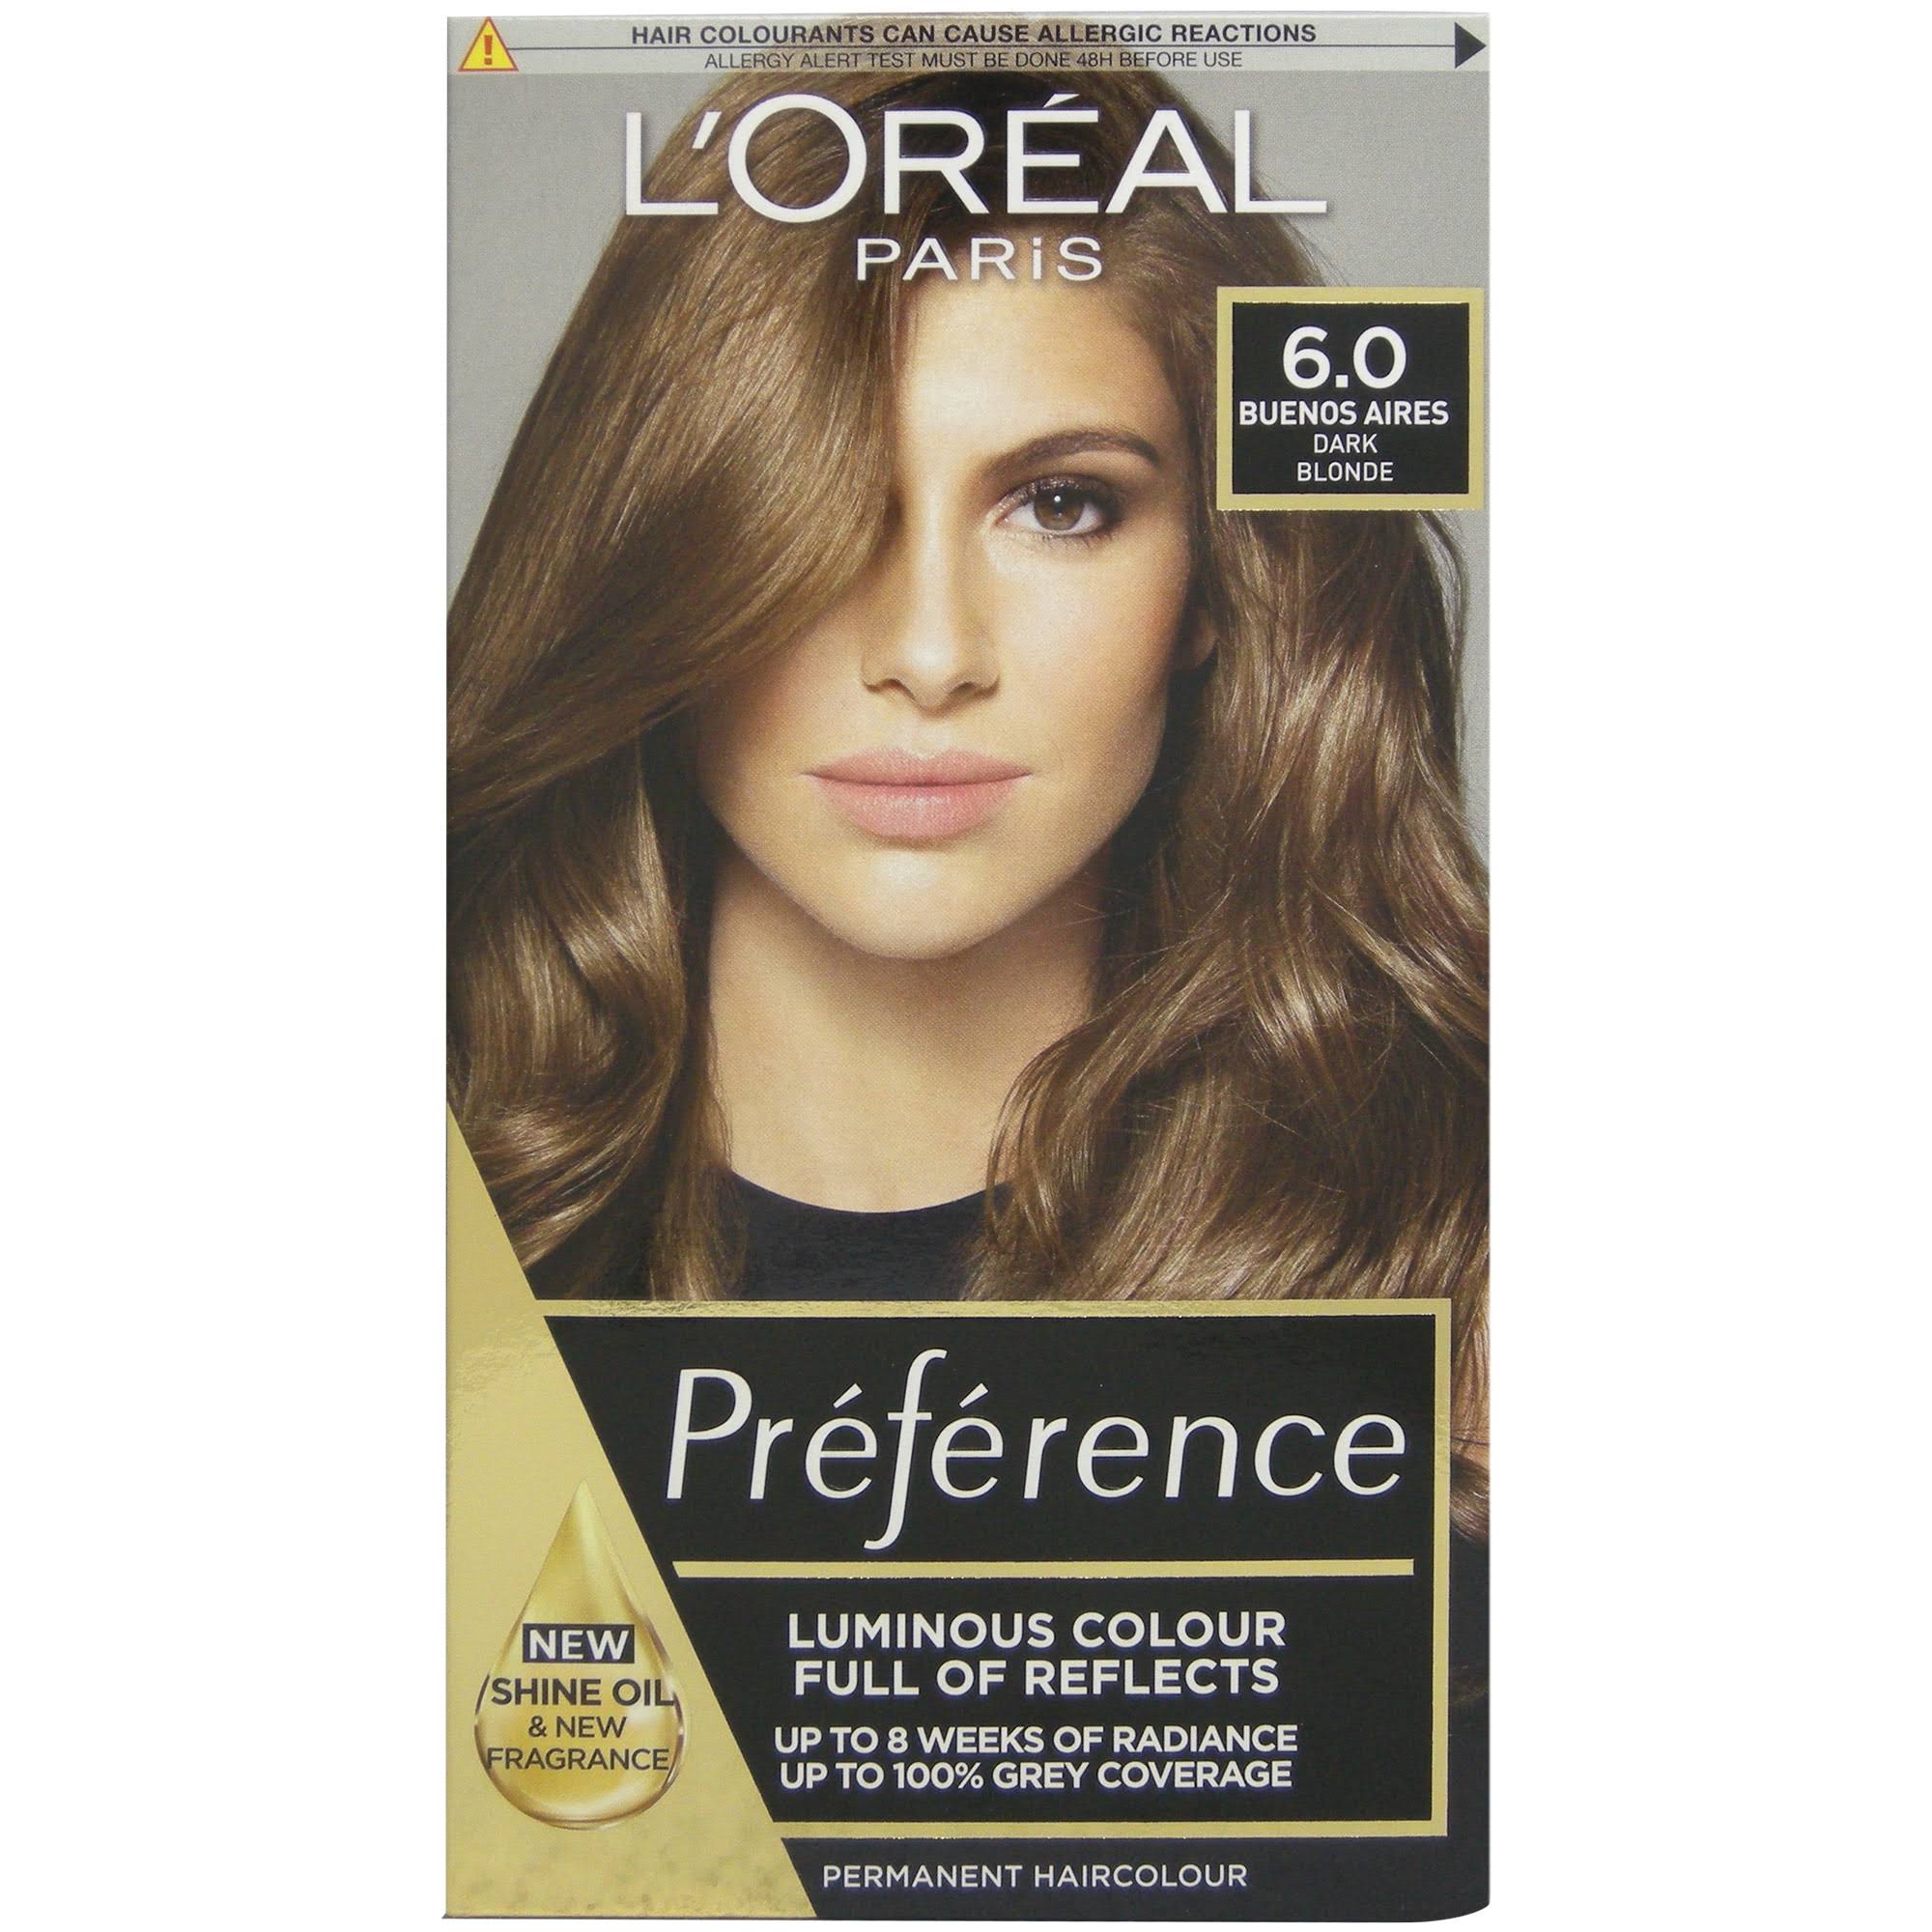 L'Oreal Preference Permanent Hair Dye - 6 Buenos Aires Dark Blonde